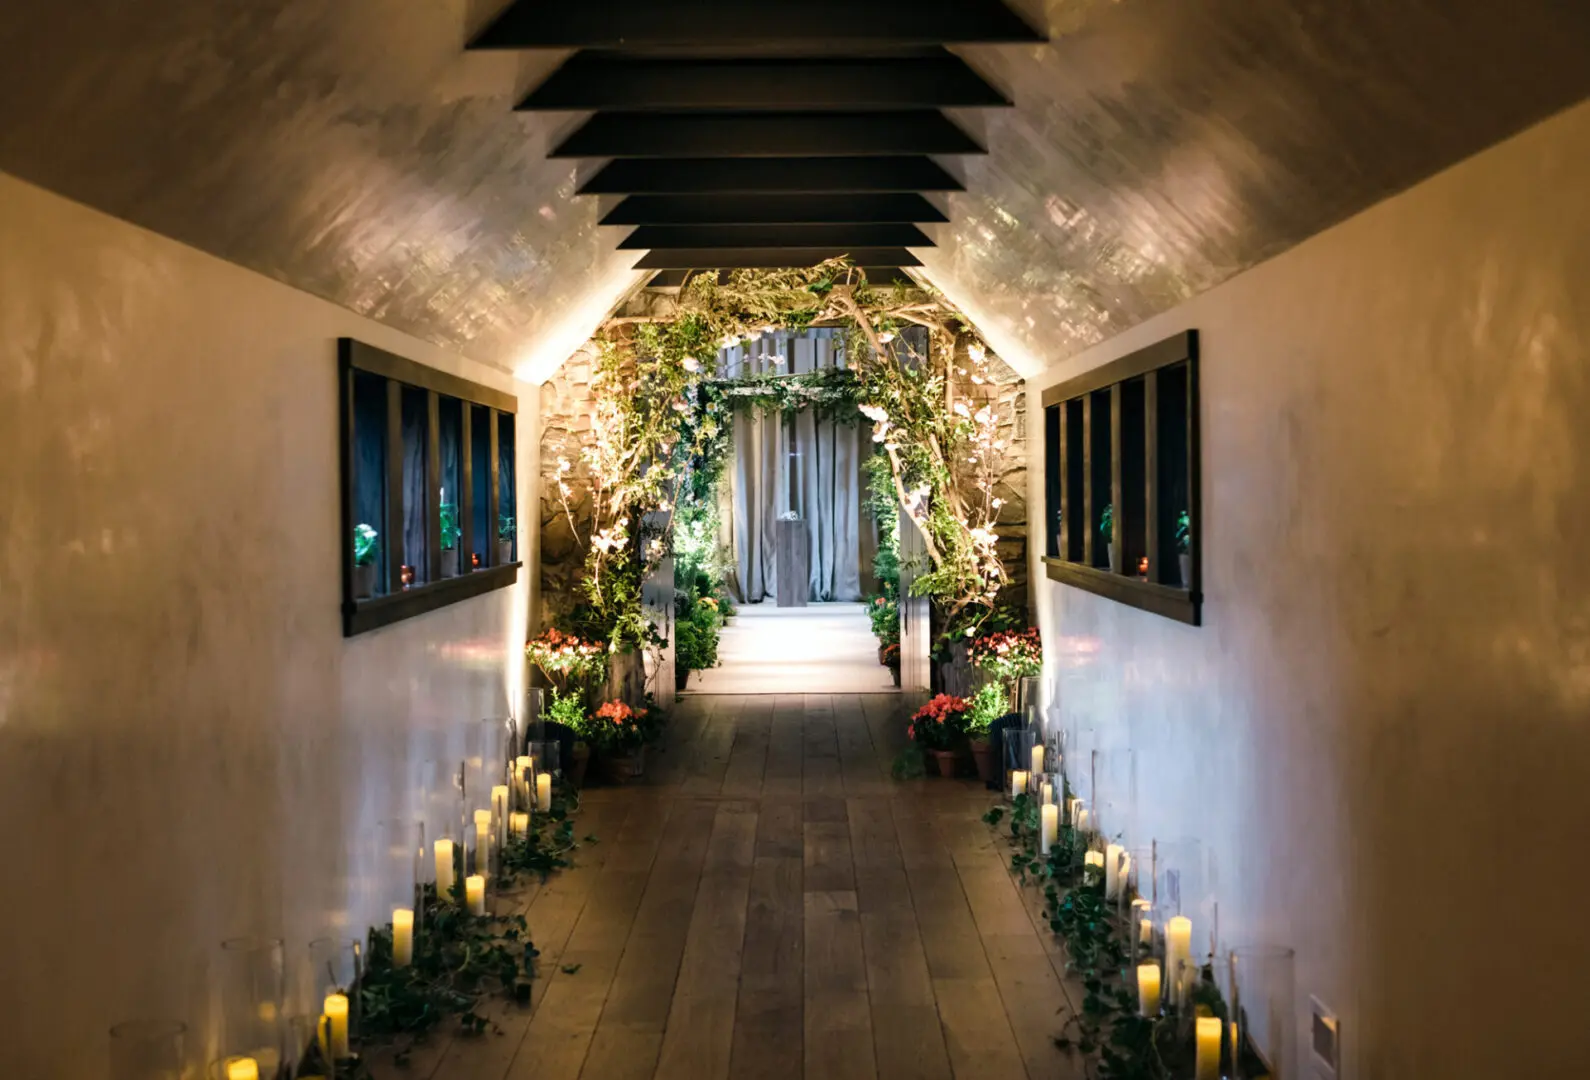 The aisle has been designed with beautiful flowers